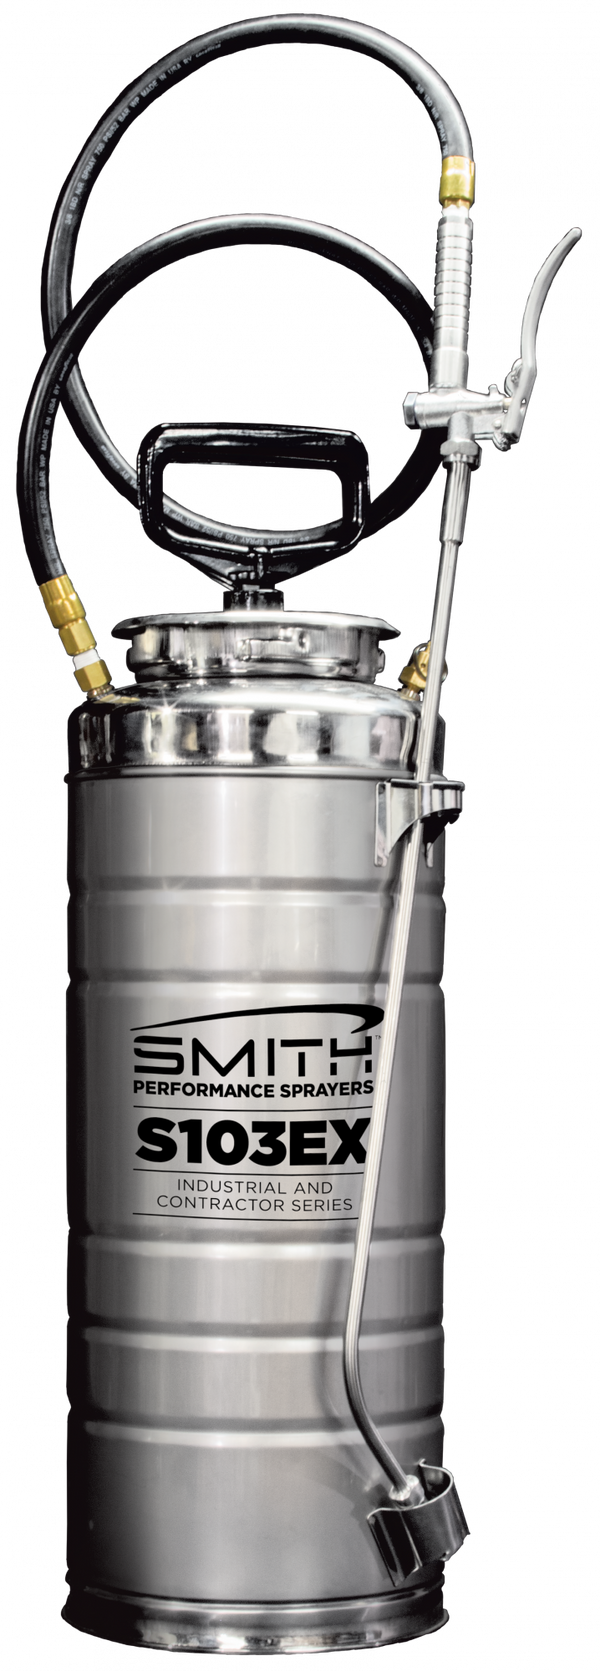 SMITH PERFORMANCE™ S103EX STAINLESS STEEL CONCRETE SPRAYER WITH VITON® EXTREME SEALS 190468